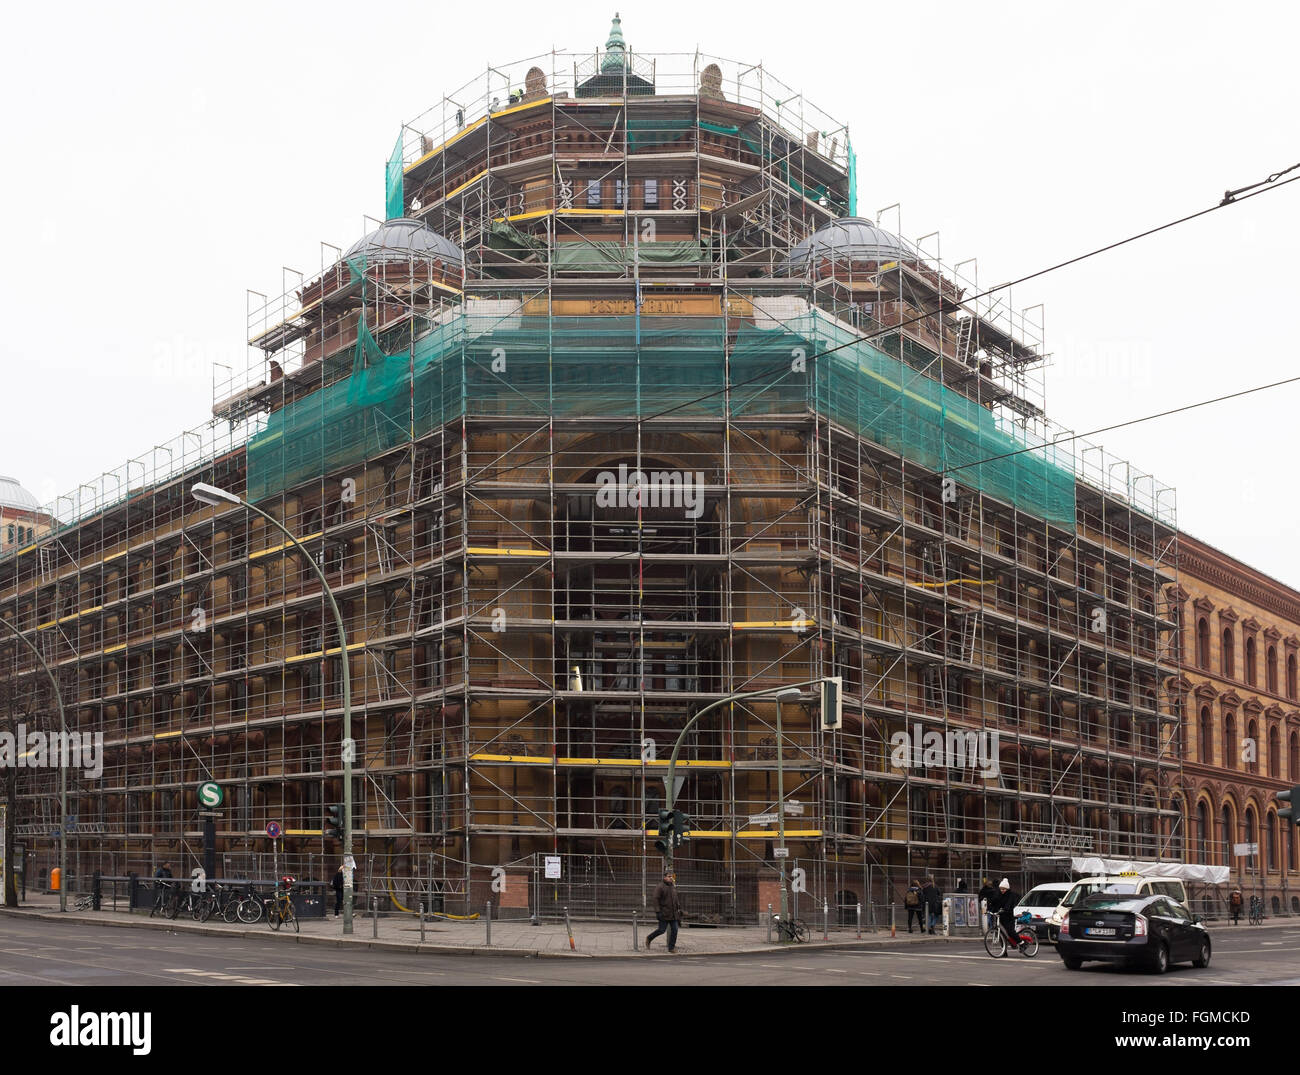 BERLIN - FEBRUARY 18: The 'Postfuhramt' building being restored in the Oranienburgerstrasse in Berlin Mitte on February 18, 2016 Stock Photo